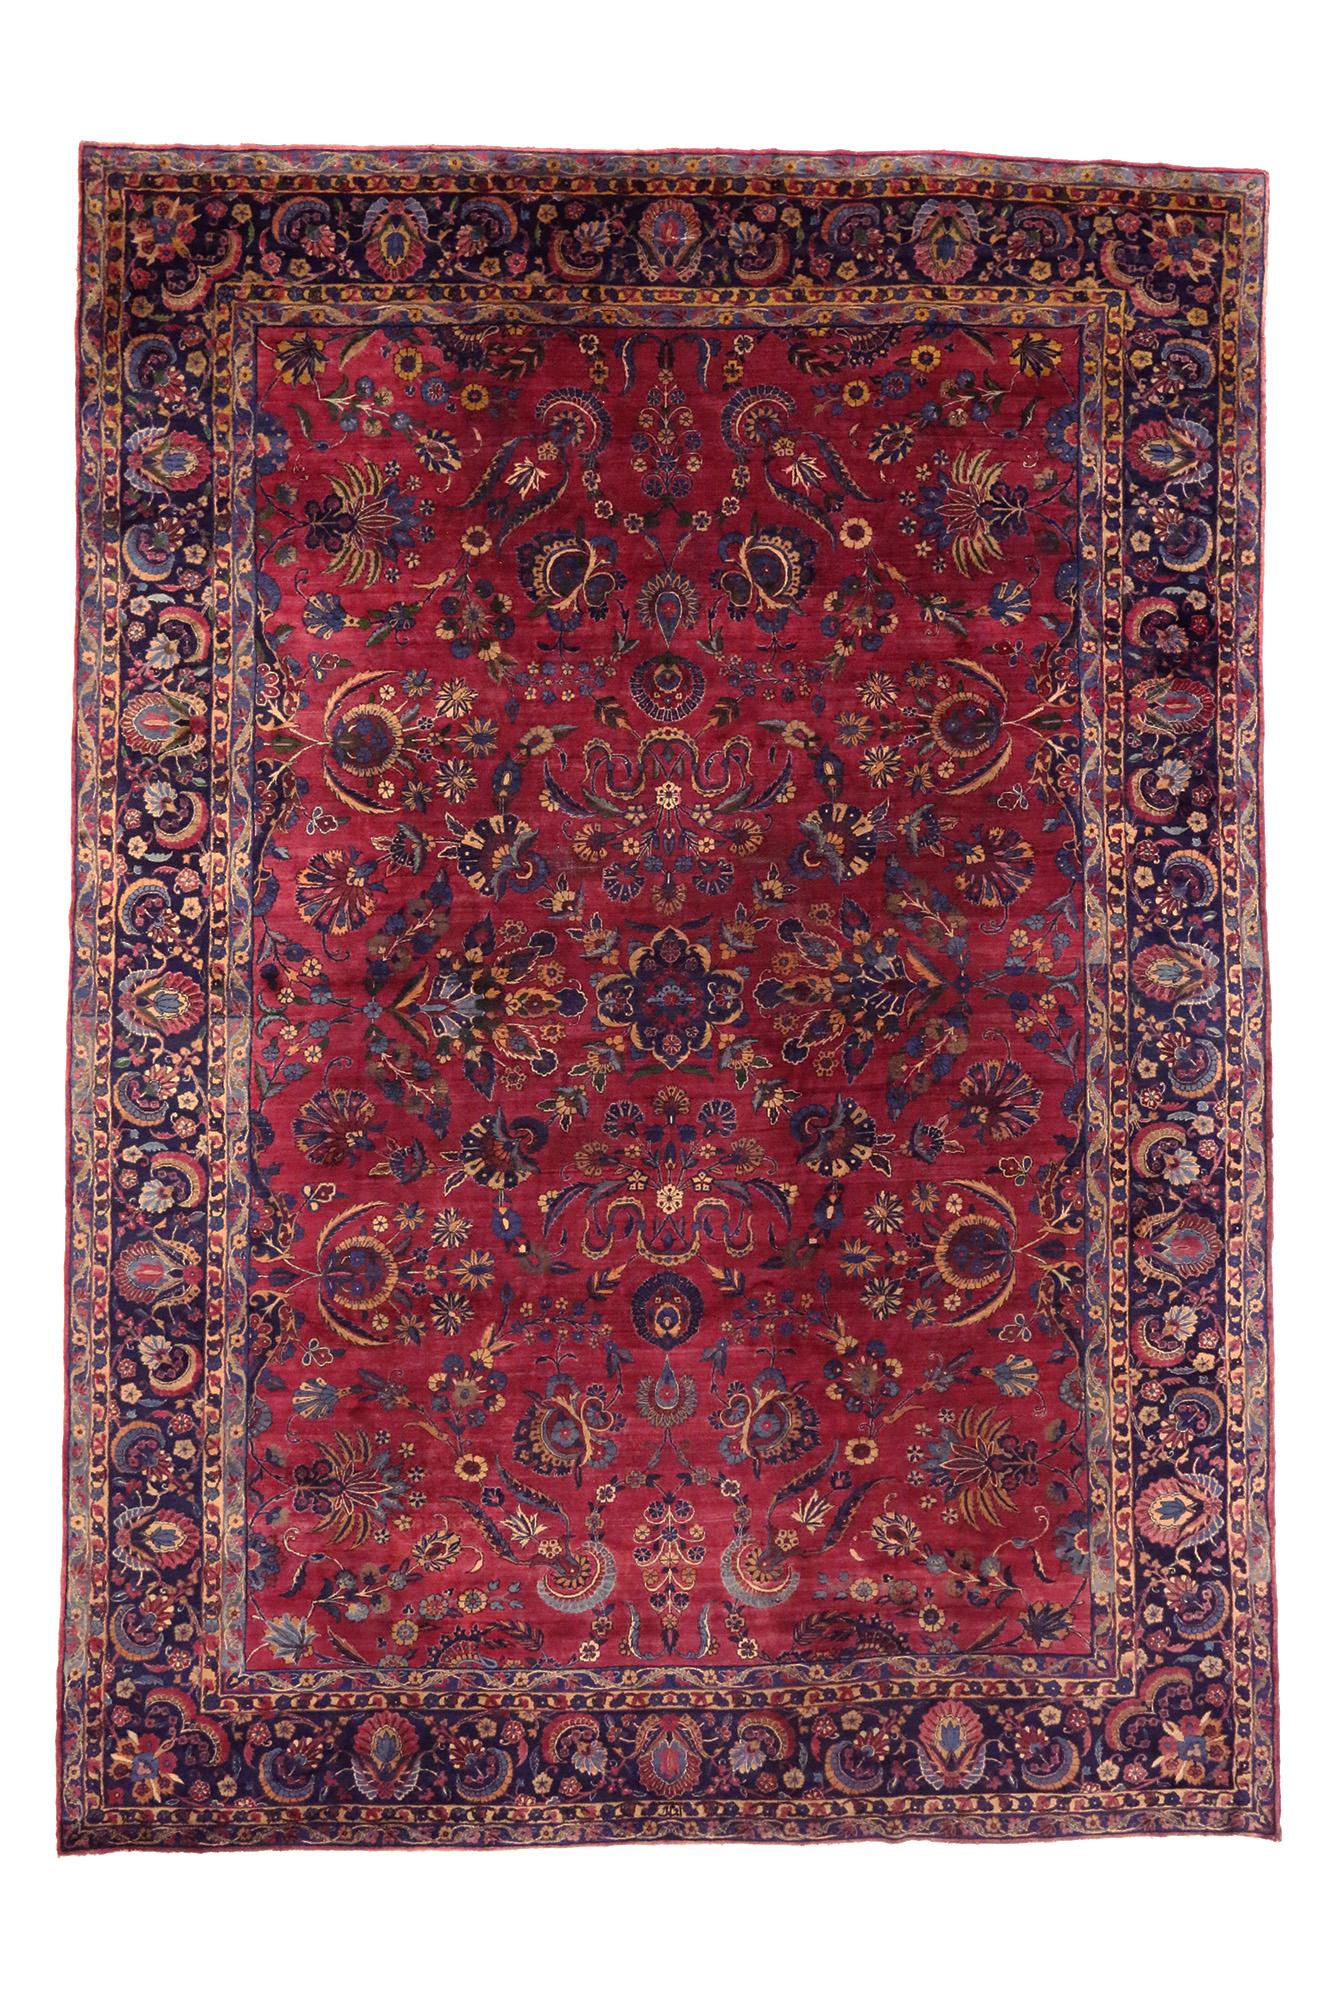 Hand-Knotted Antique Burgundy Persian Yazd Rug with Victorian Renaissance Style For Sale